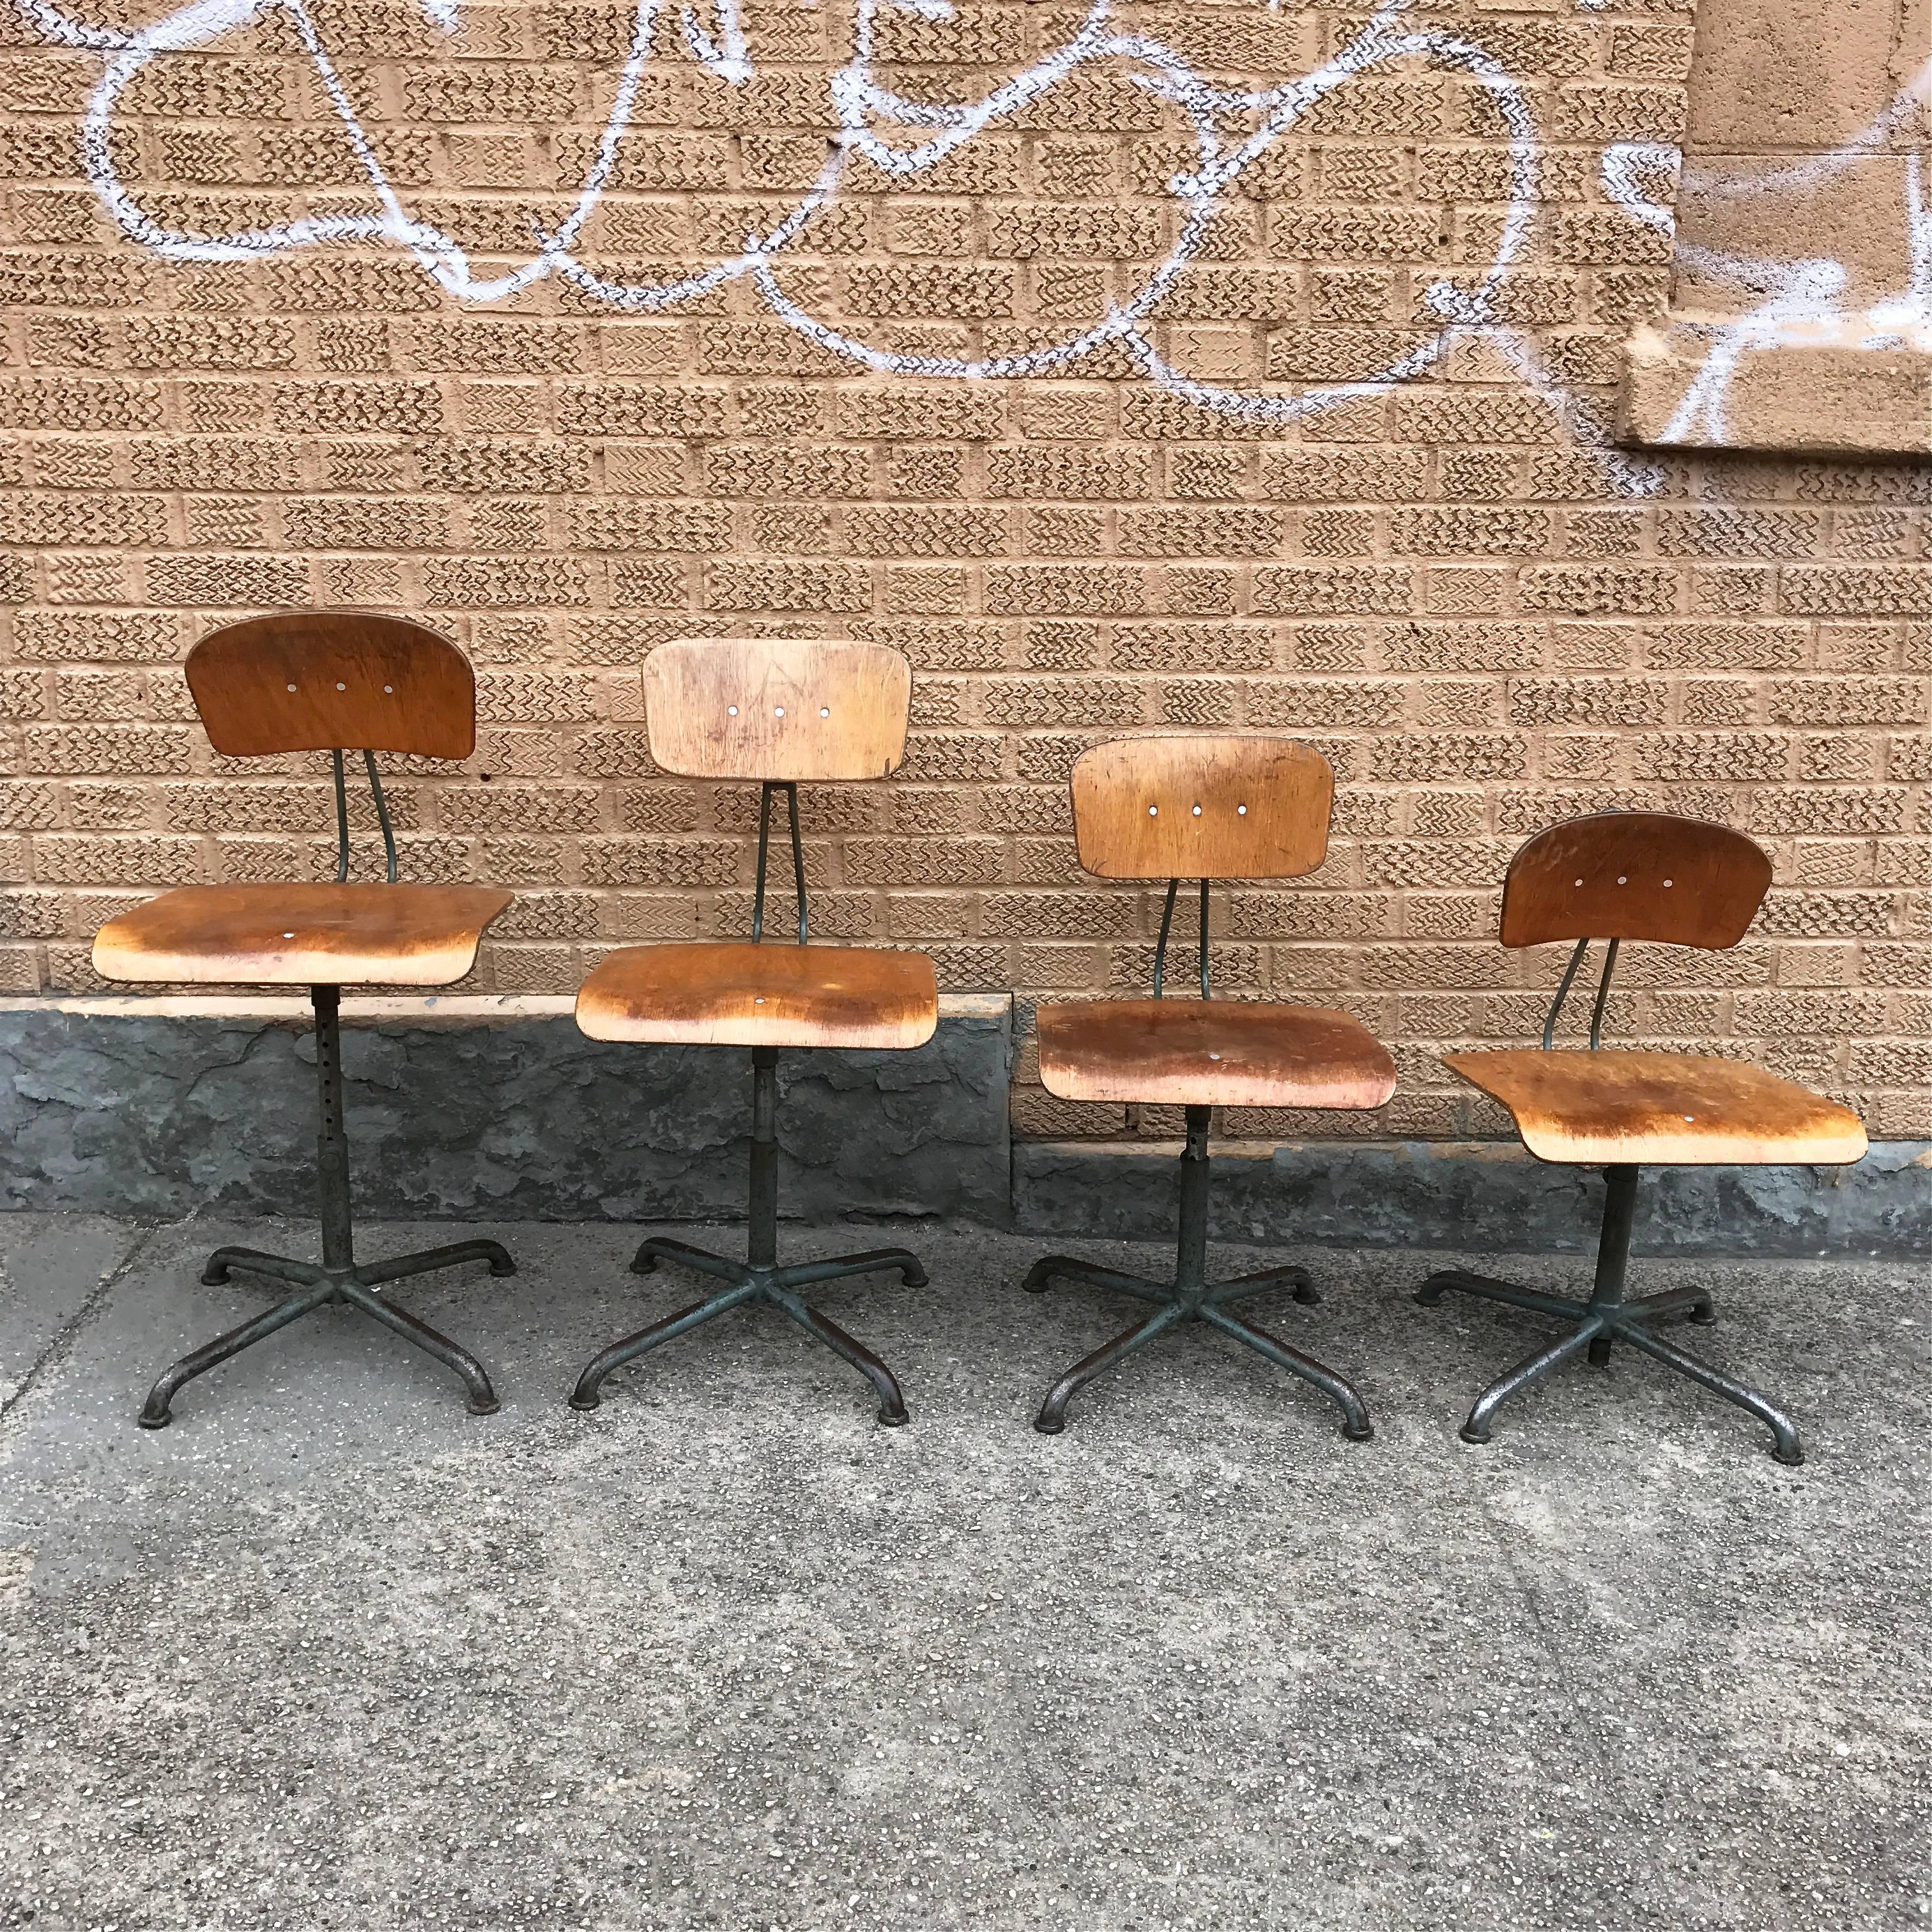 Set of four, Industrial, height adjustable, bent plywood and steel, swivel, shop stools by Swiss maker Basler Eisenmöbelfabrik Sissach, BES feature a well worn patina.

Measures: Seat height adjusts from 15 in-21 in height
Total height adjusts